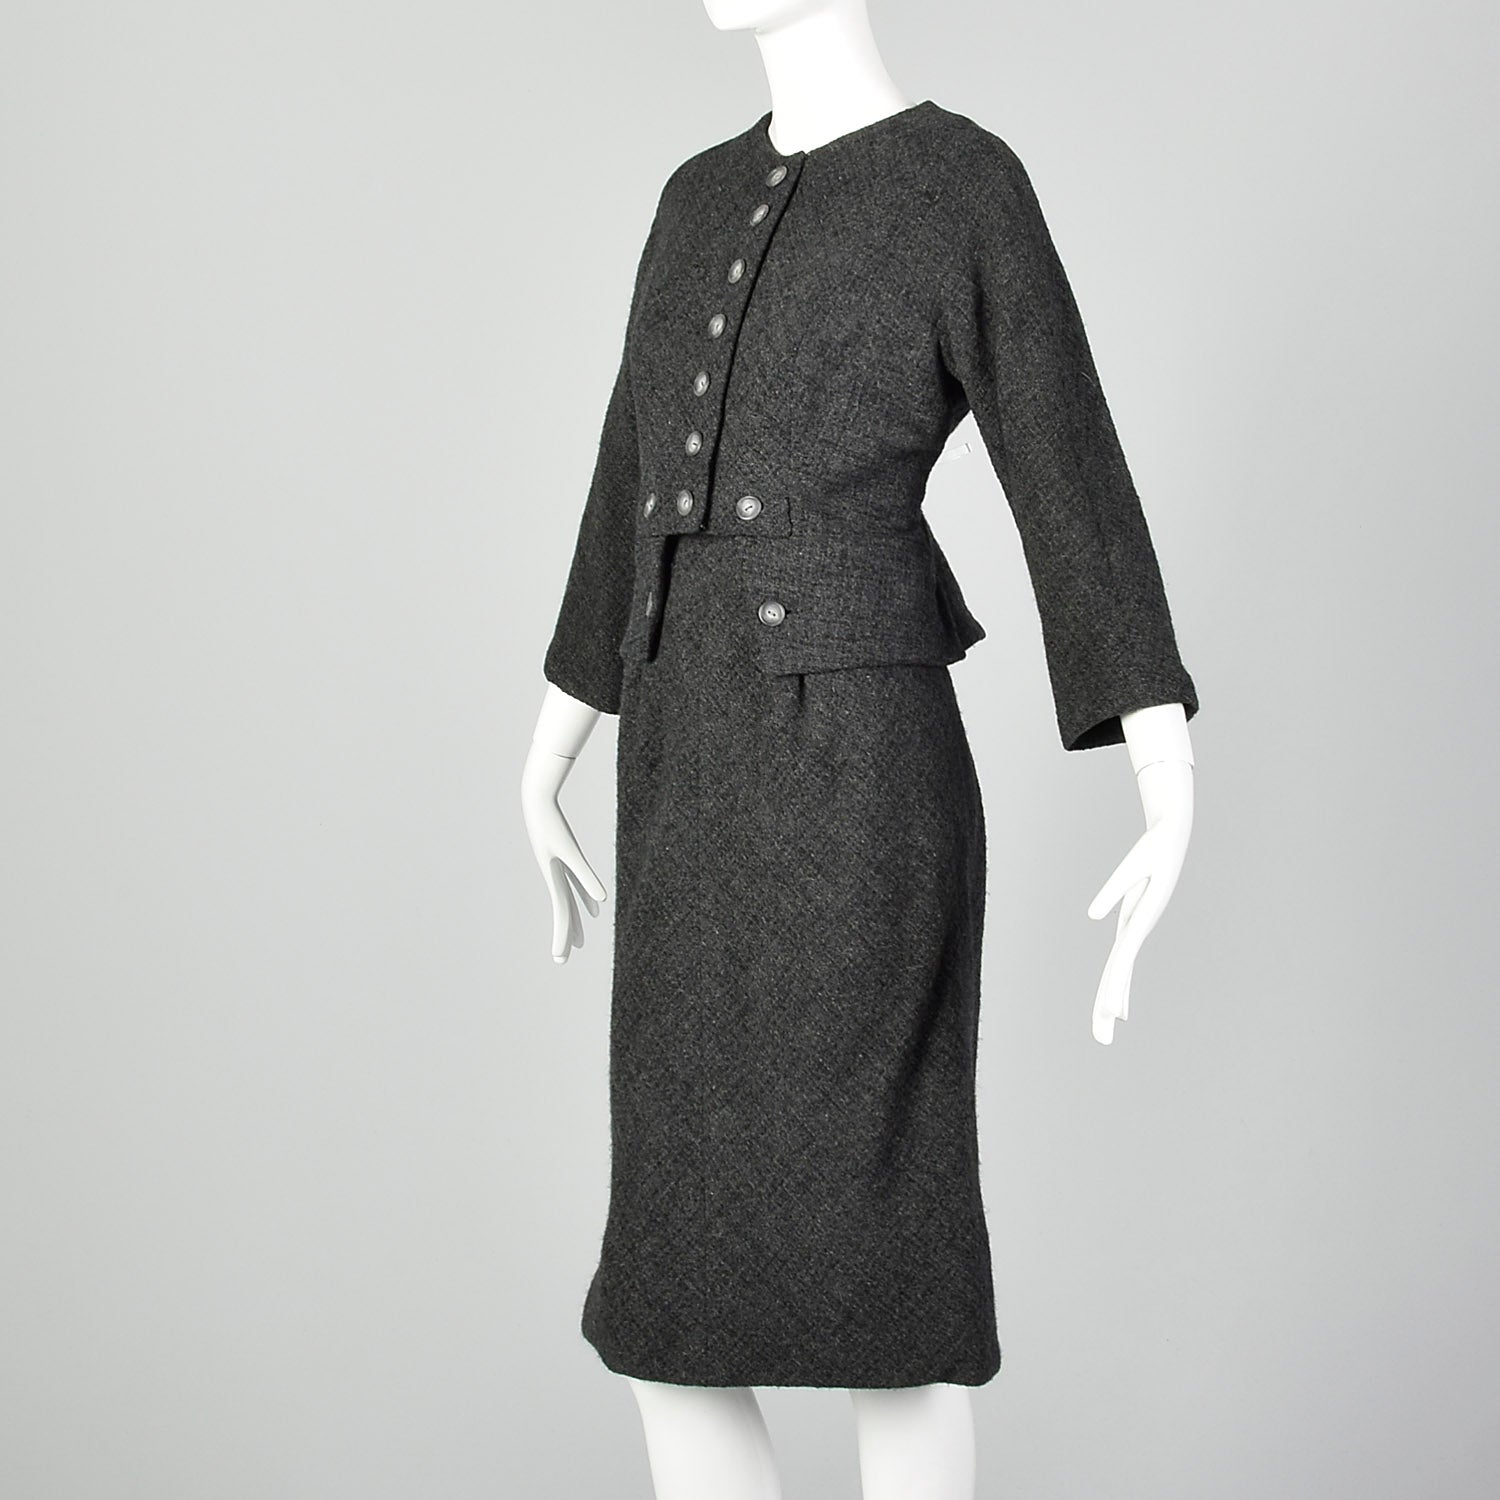 1960s James Galanos Two Piece Dress Set in Gray Wool Tweed